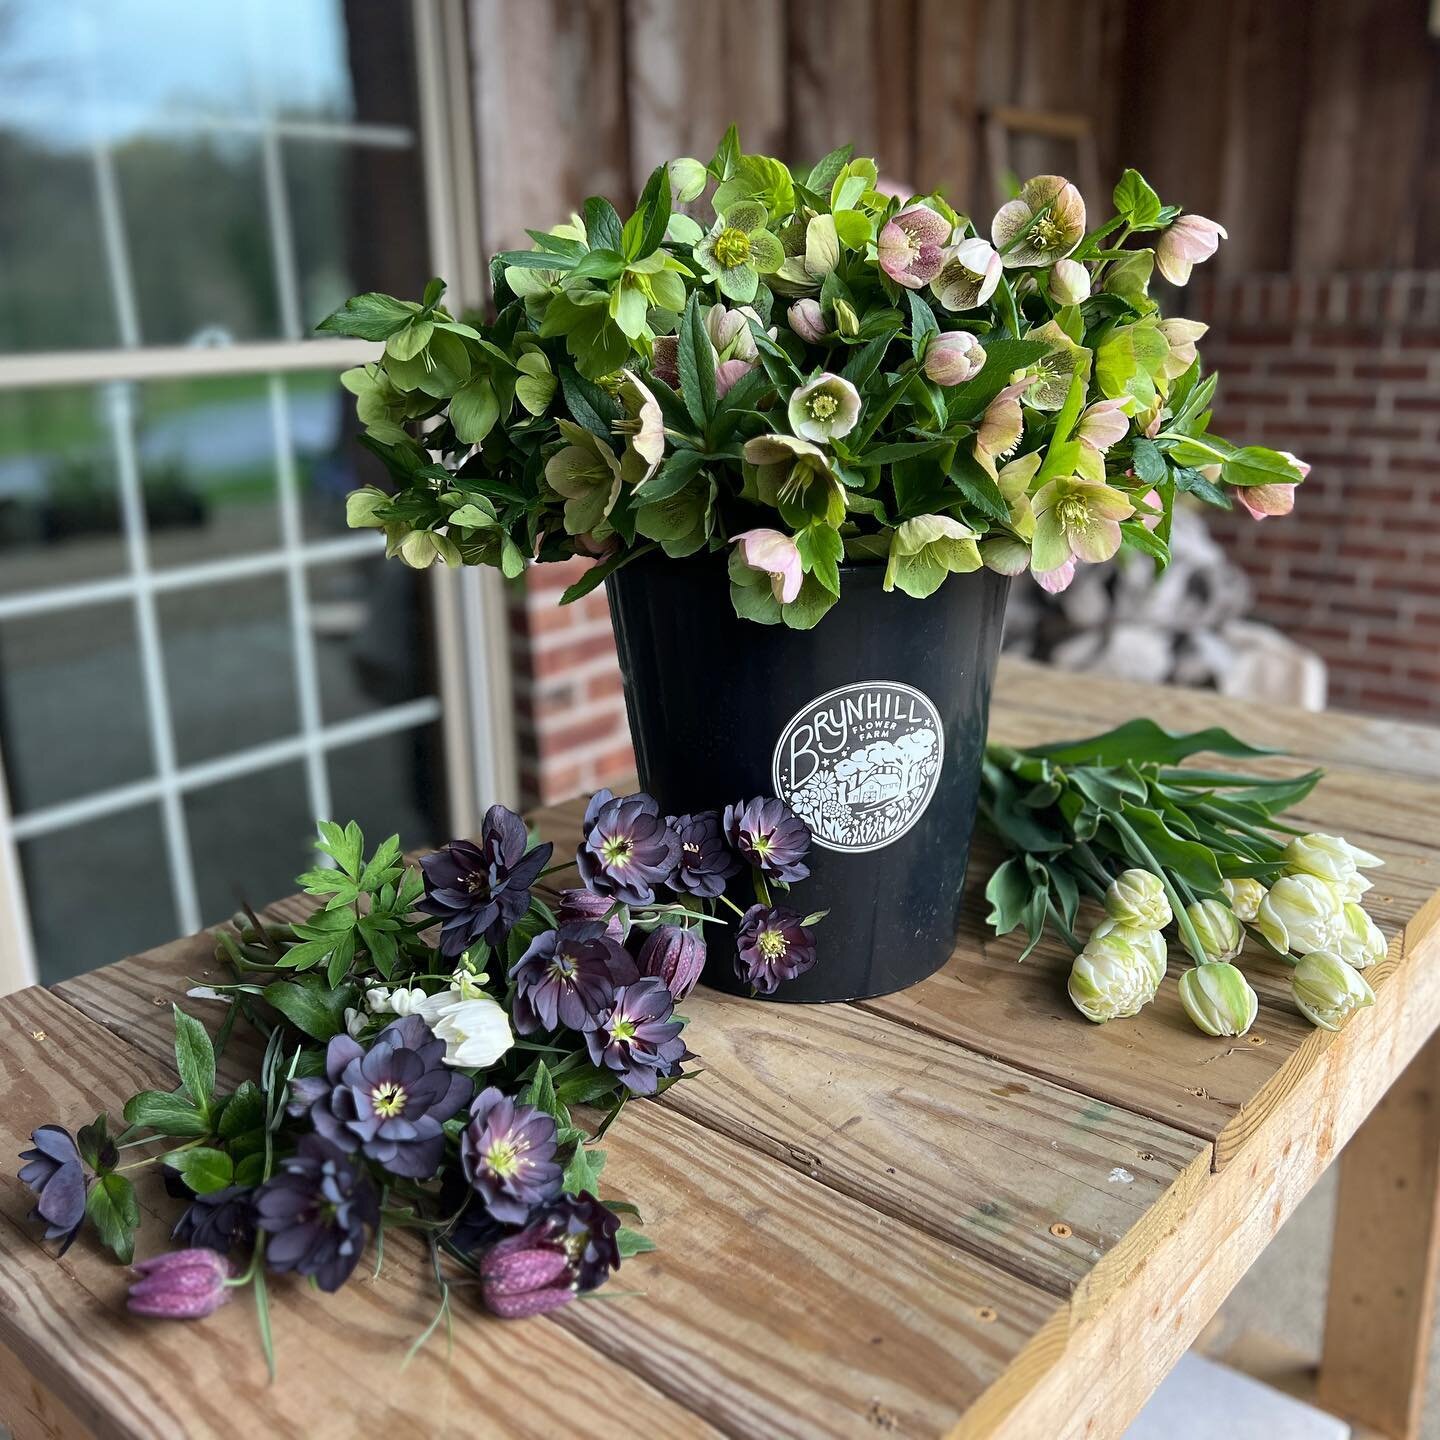 Tulips, hellebores, and fritillaria, oh my! Our latest Spring bounty deserves a permanent spot on the feed ✨🌷